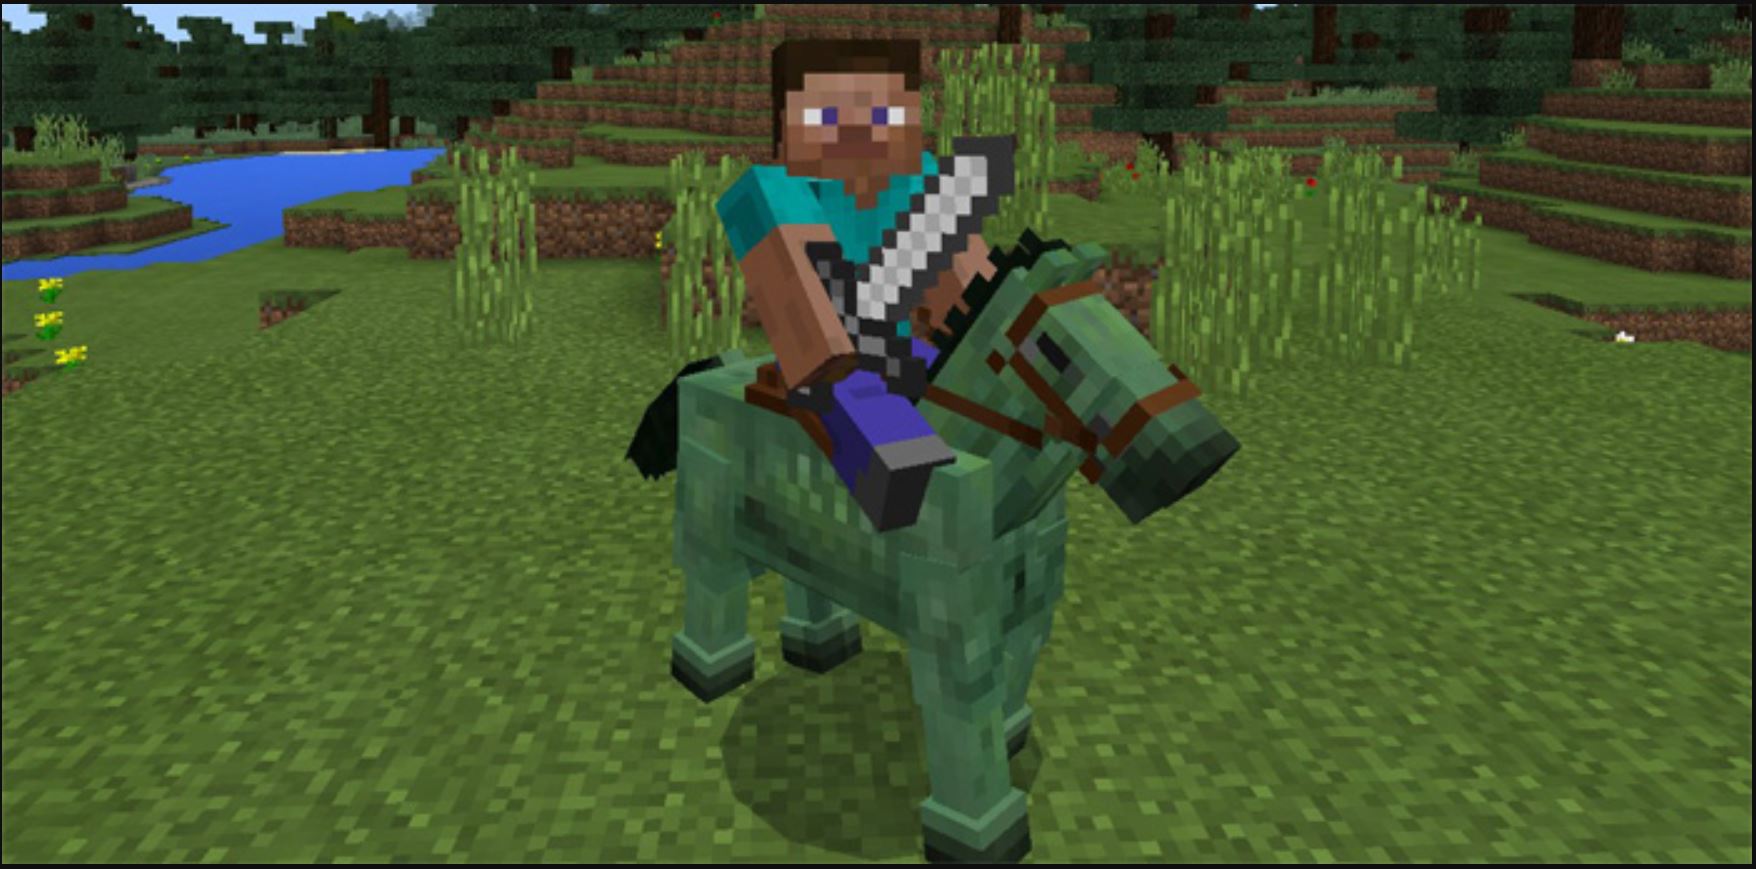 Minecraft Mobs Explored: The Zombie Horse, One Of The Fastest Ways Of Public Transportation